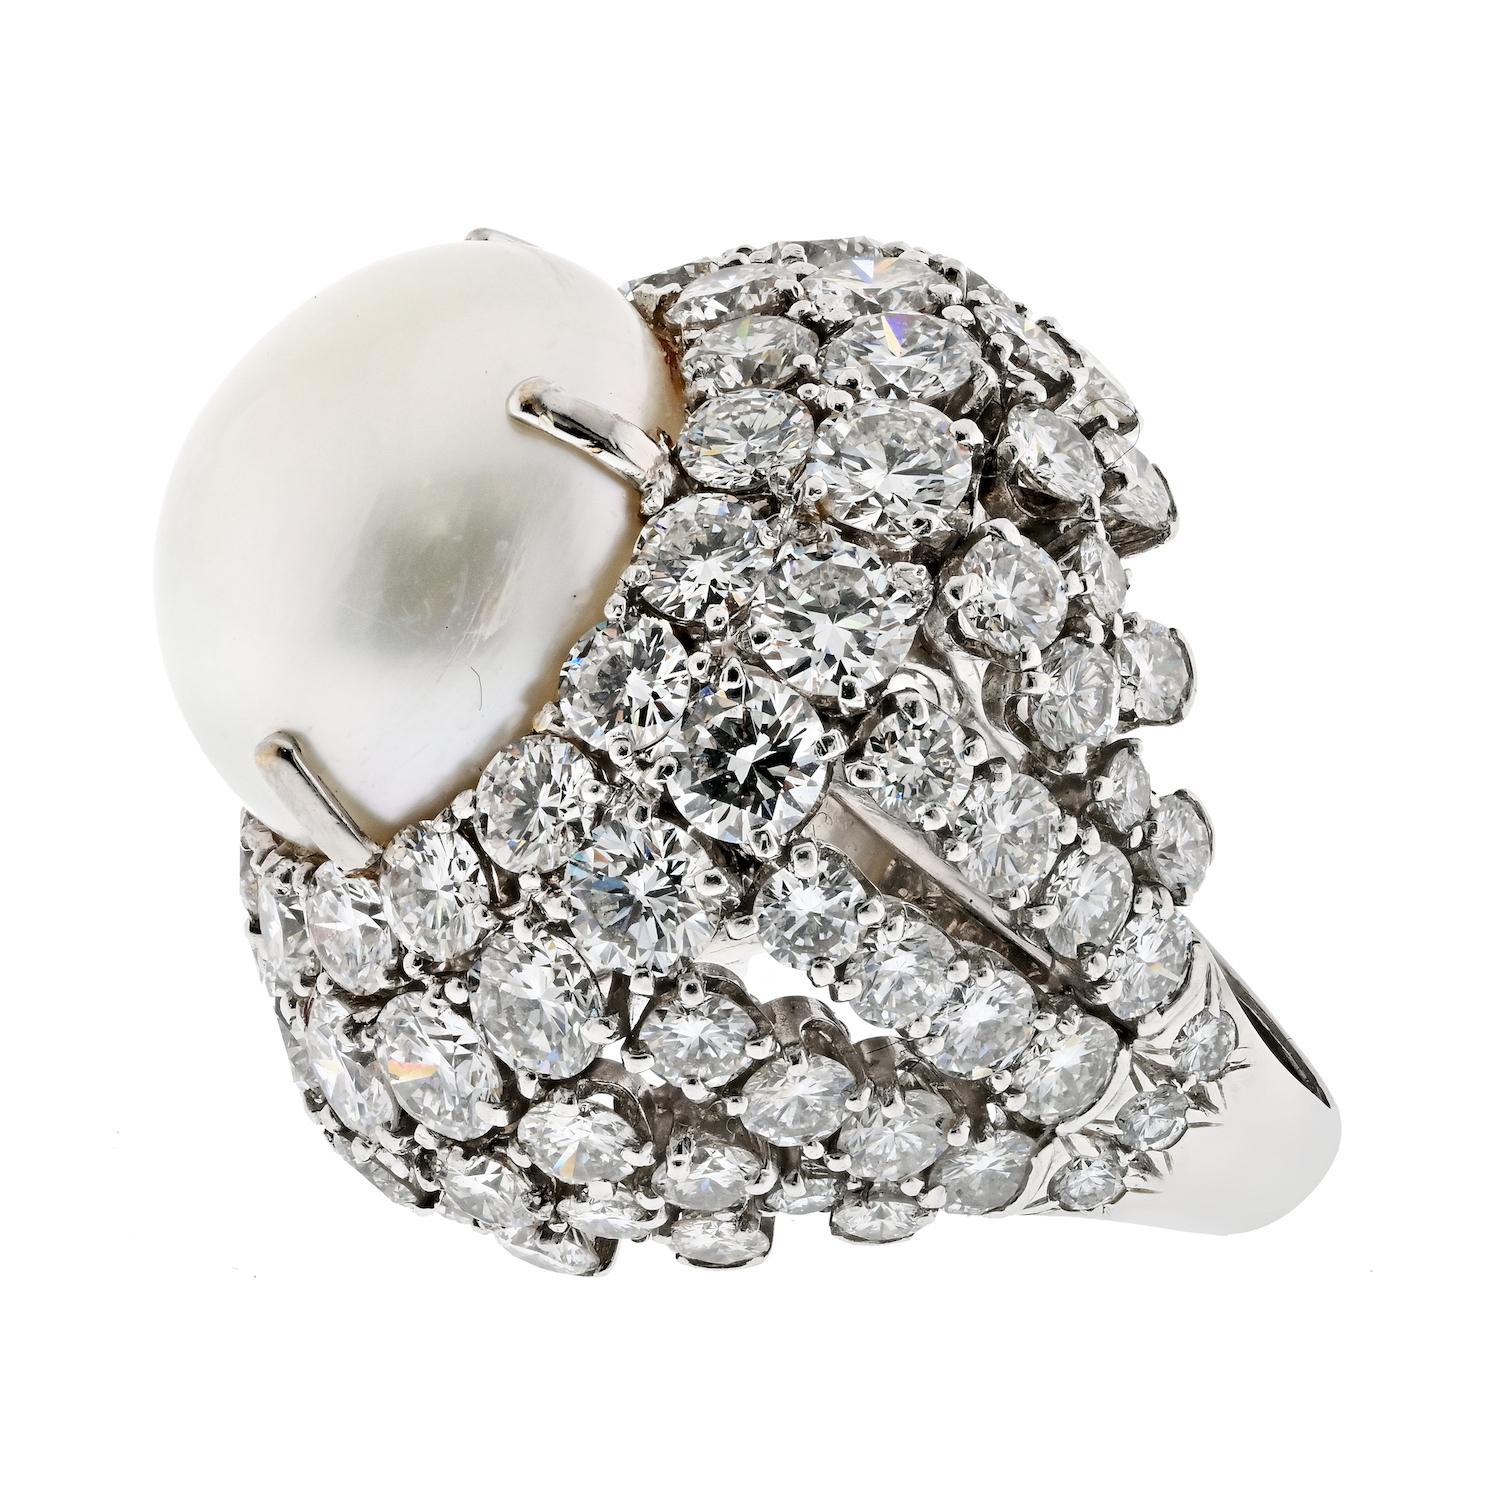 The Diamond and South Sea Pearl Bombe Cocktail Ring by David Webb is an extraordinary piece of jewelry that exudes luxury and sophistication. Made in platinum and mounted with a single large white South Sea pearl (17mm), this ring is a true